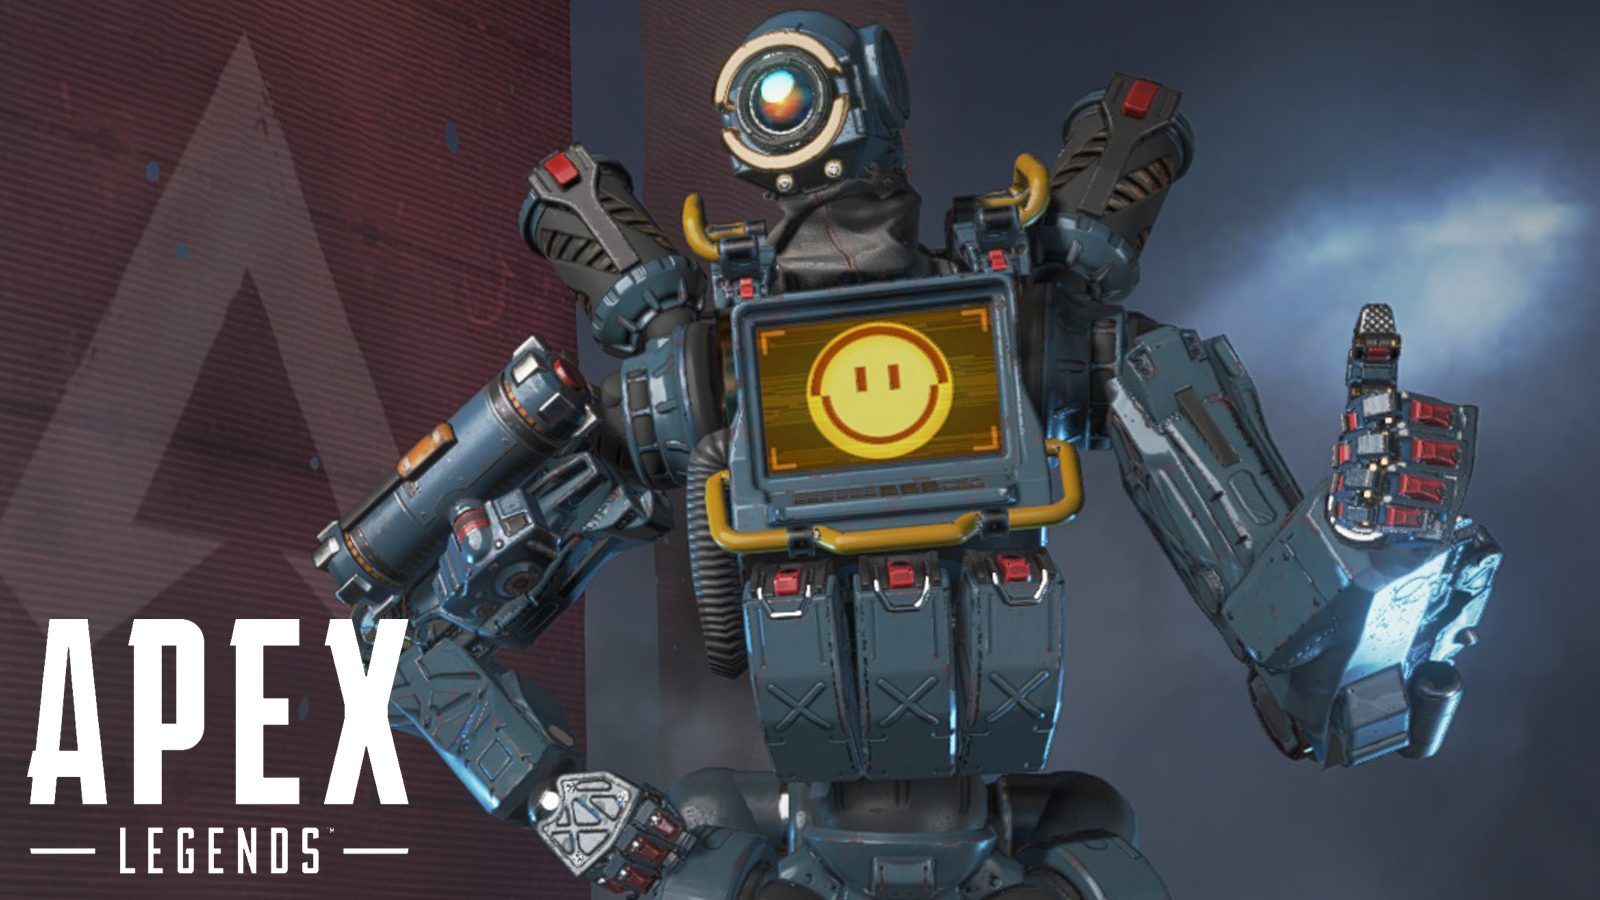 Upcoming Apex Legends Patch Will Address PS4 Banner Bug, Audio